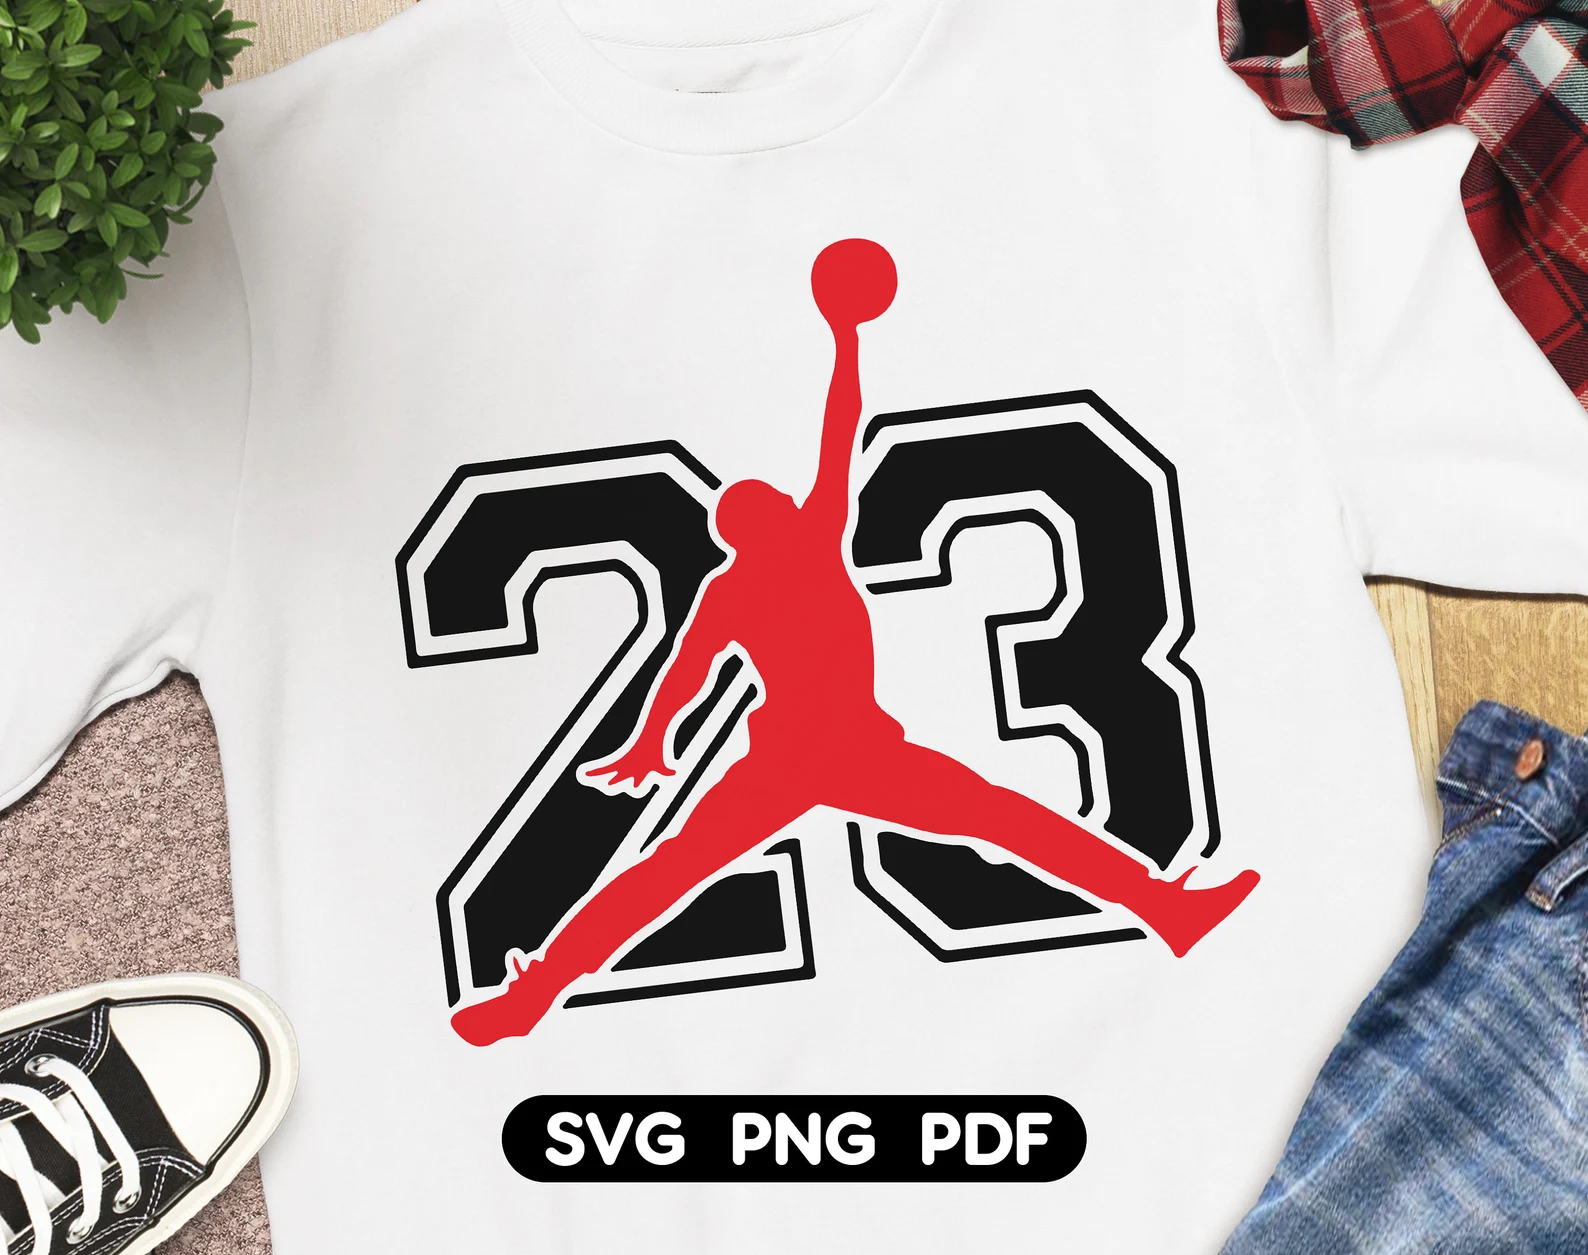 White t-shirt with the black number and red Jordan.